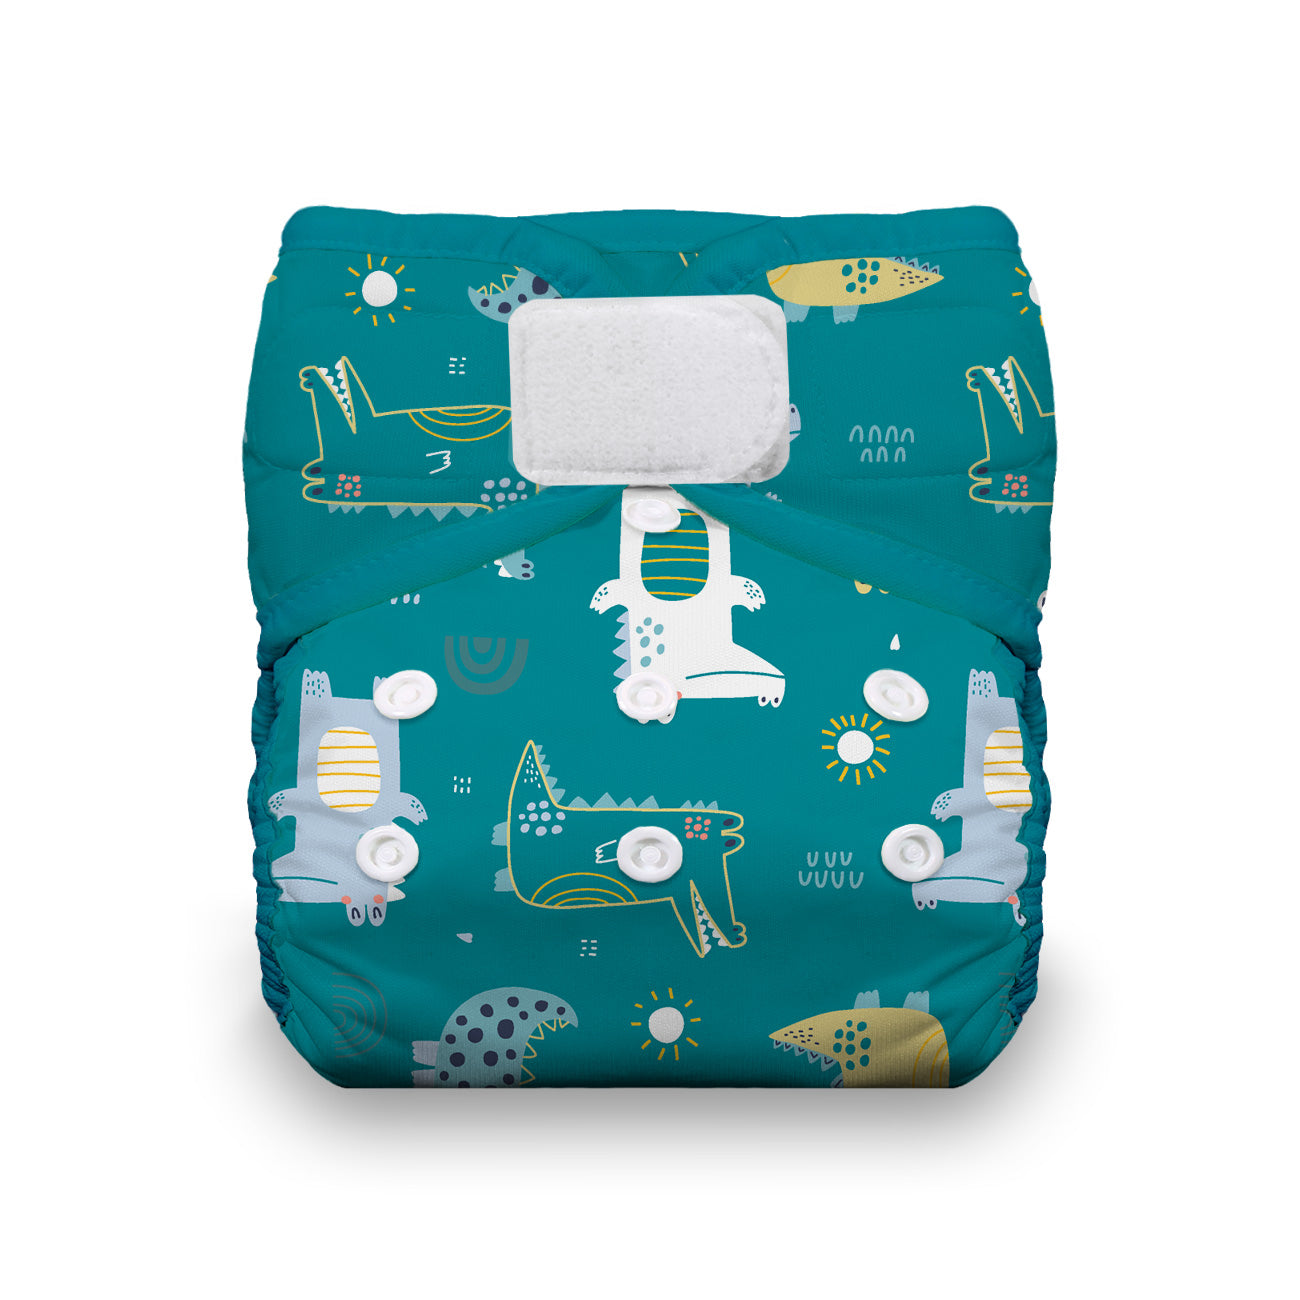 Image of Thirsties One Size Pocket Diaper with Hook and Loop in Crockin